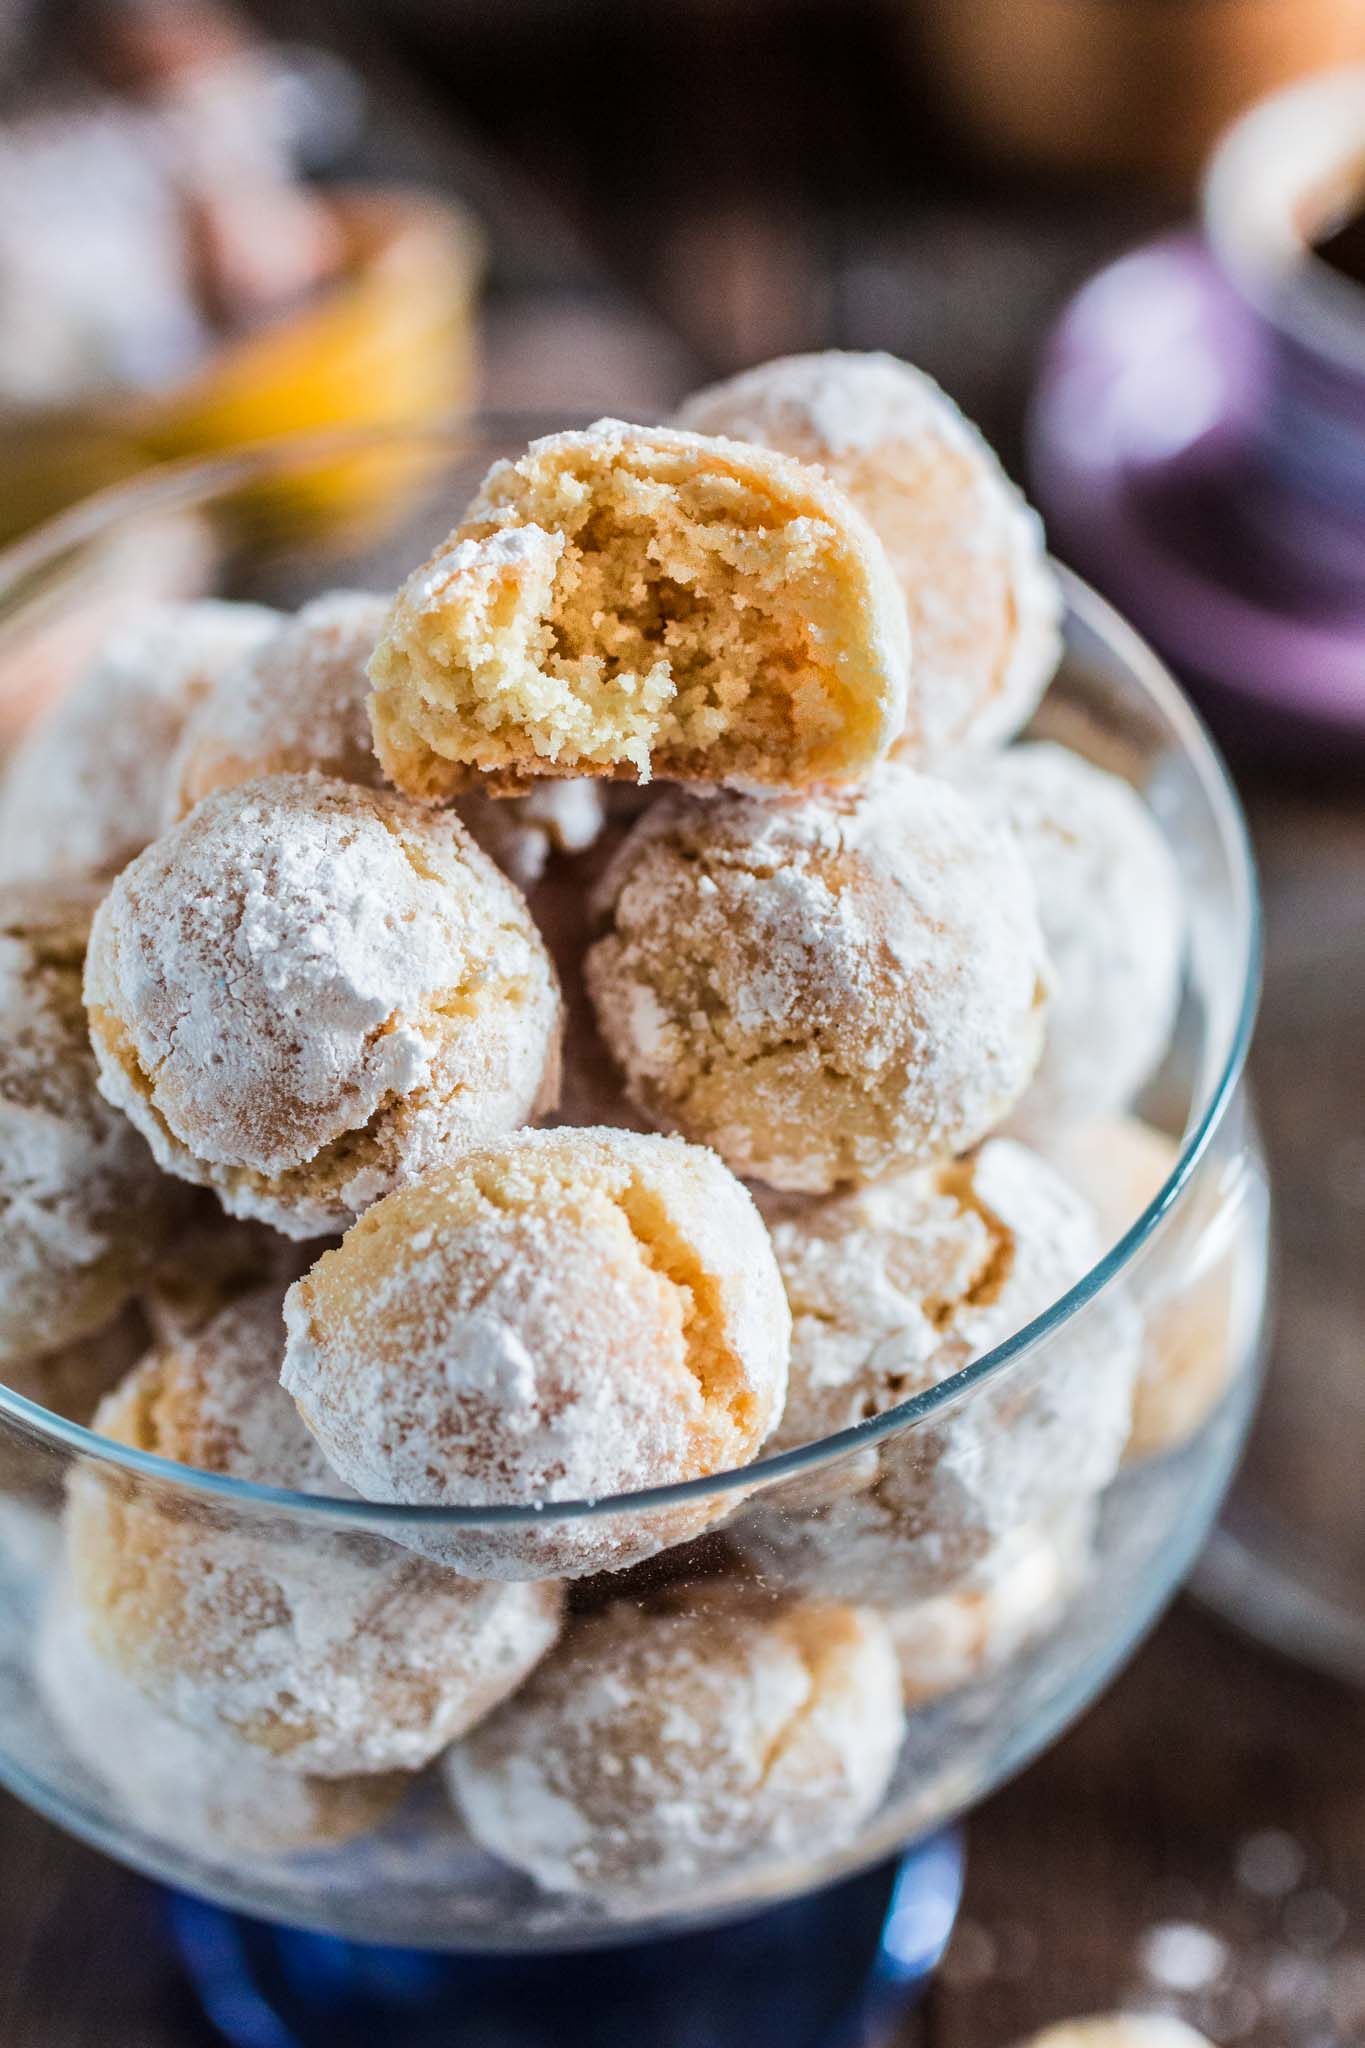 Amaretti Cookies | www.oliviascuisine.com | These chewy almond-flavored cookies are the most perfect accompaniment for a cup of coffee or Italian espresso. You might wanna double the batch, because they usually go very quickly!